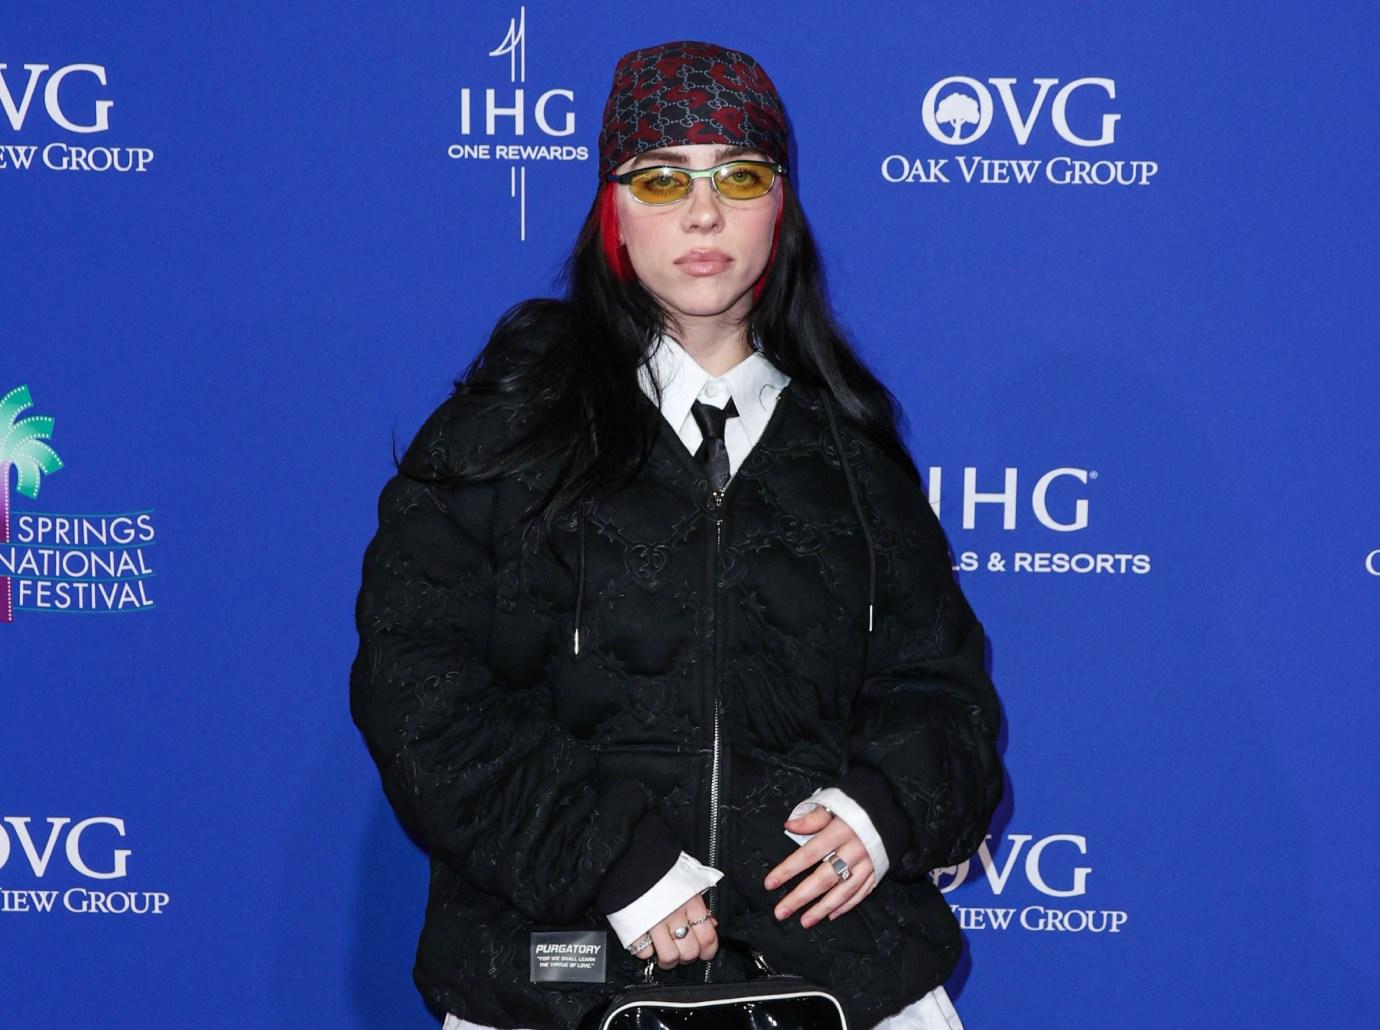 Billie Eilish laughs off wardrobe malfunction as she covers boobs